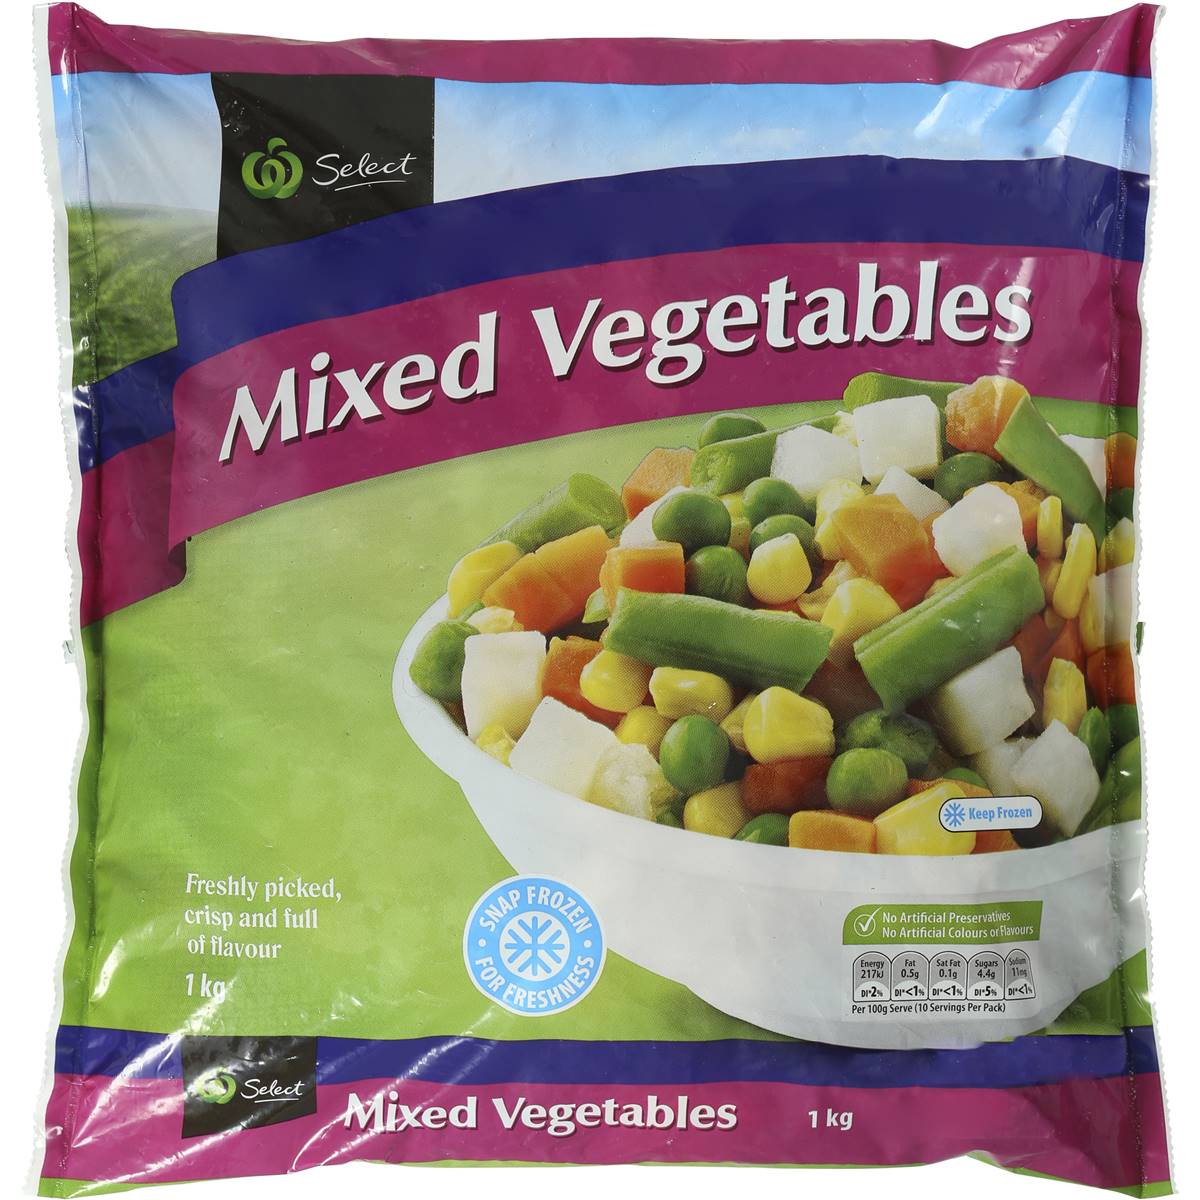 Woolworths Select Mixed Vegetables 